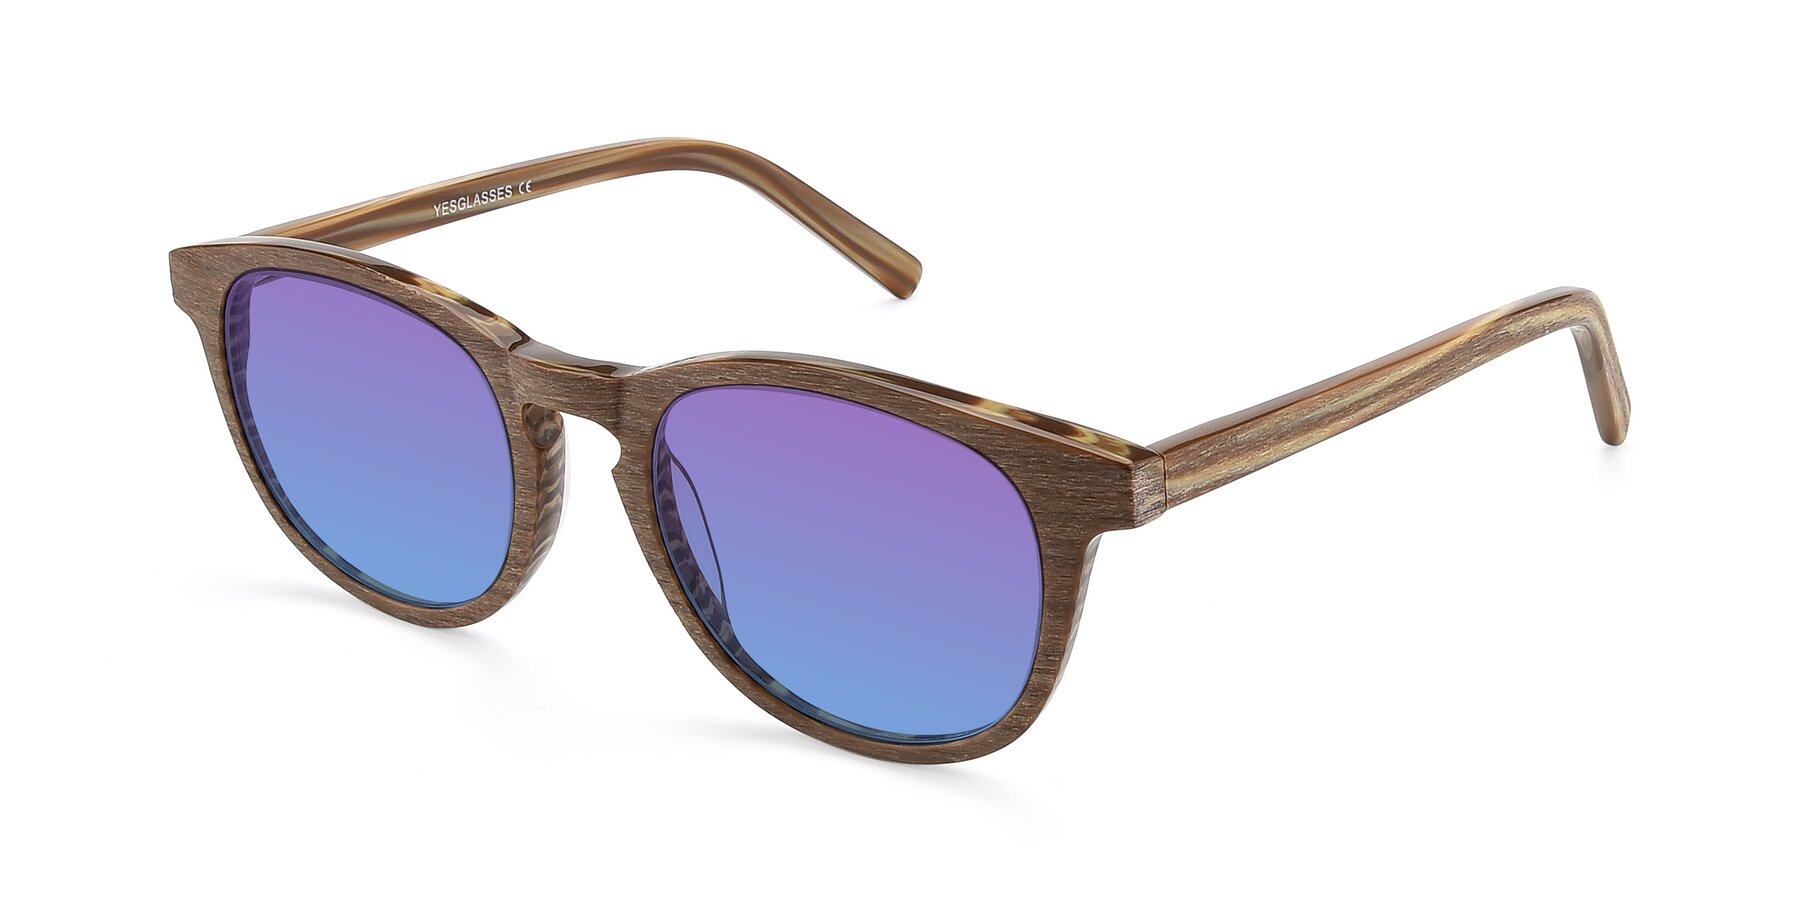 Angle of SR6044 in Brown-Wooden with Purple / Blue Gradient Lenses